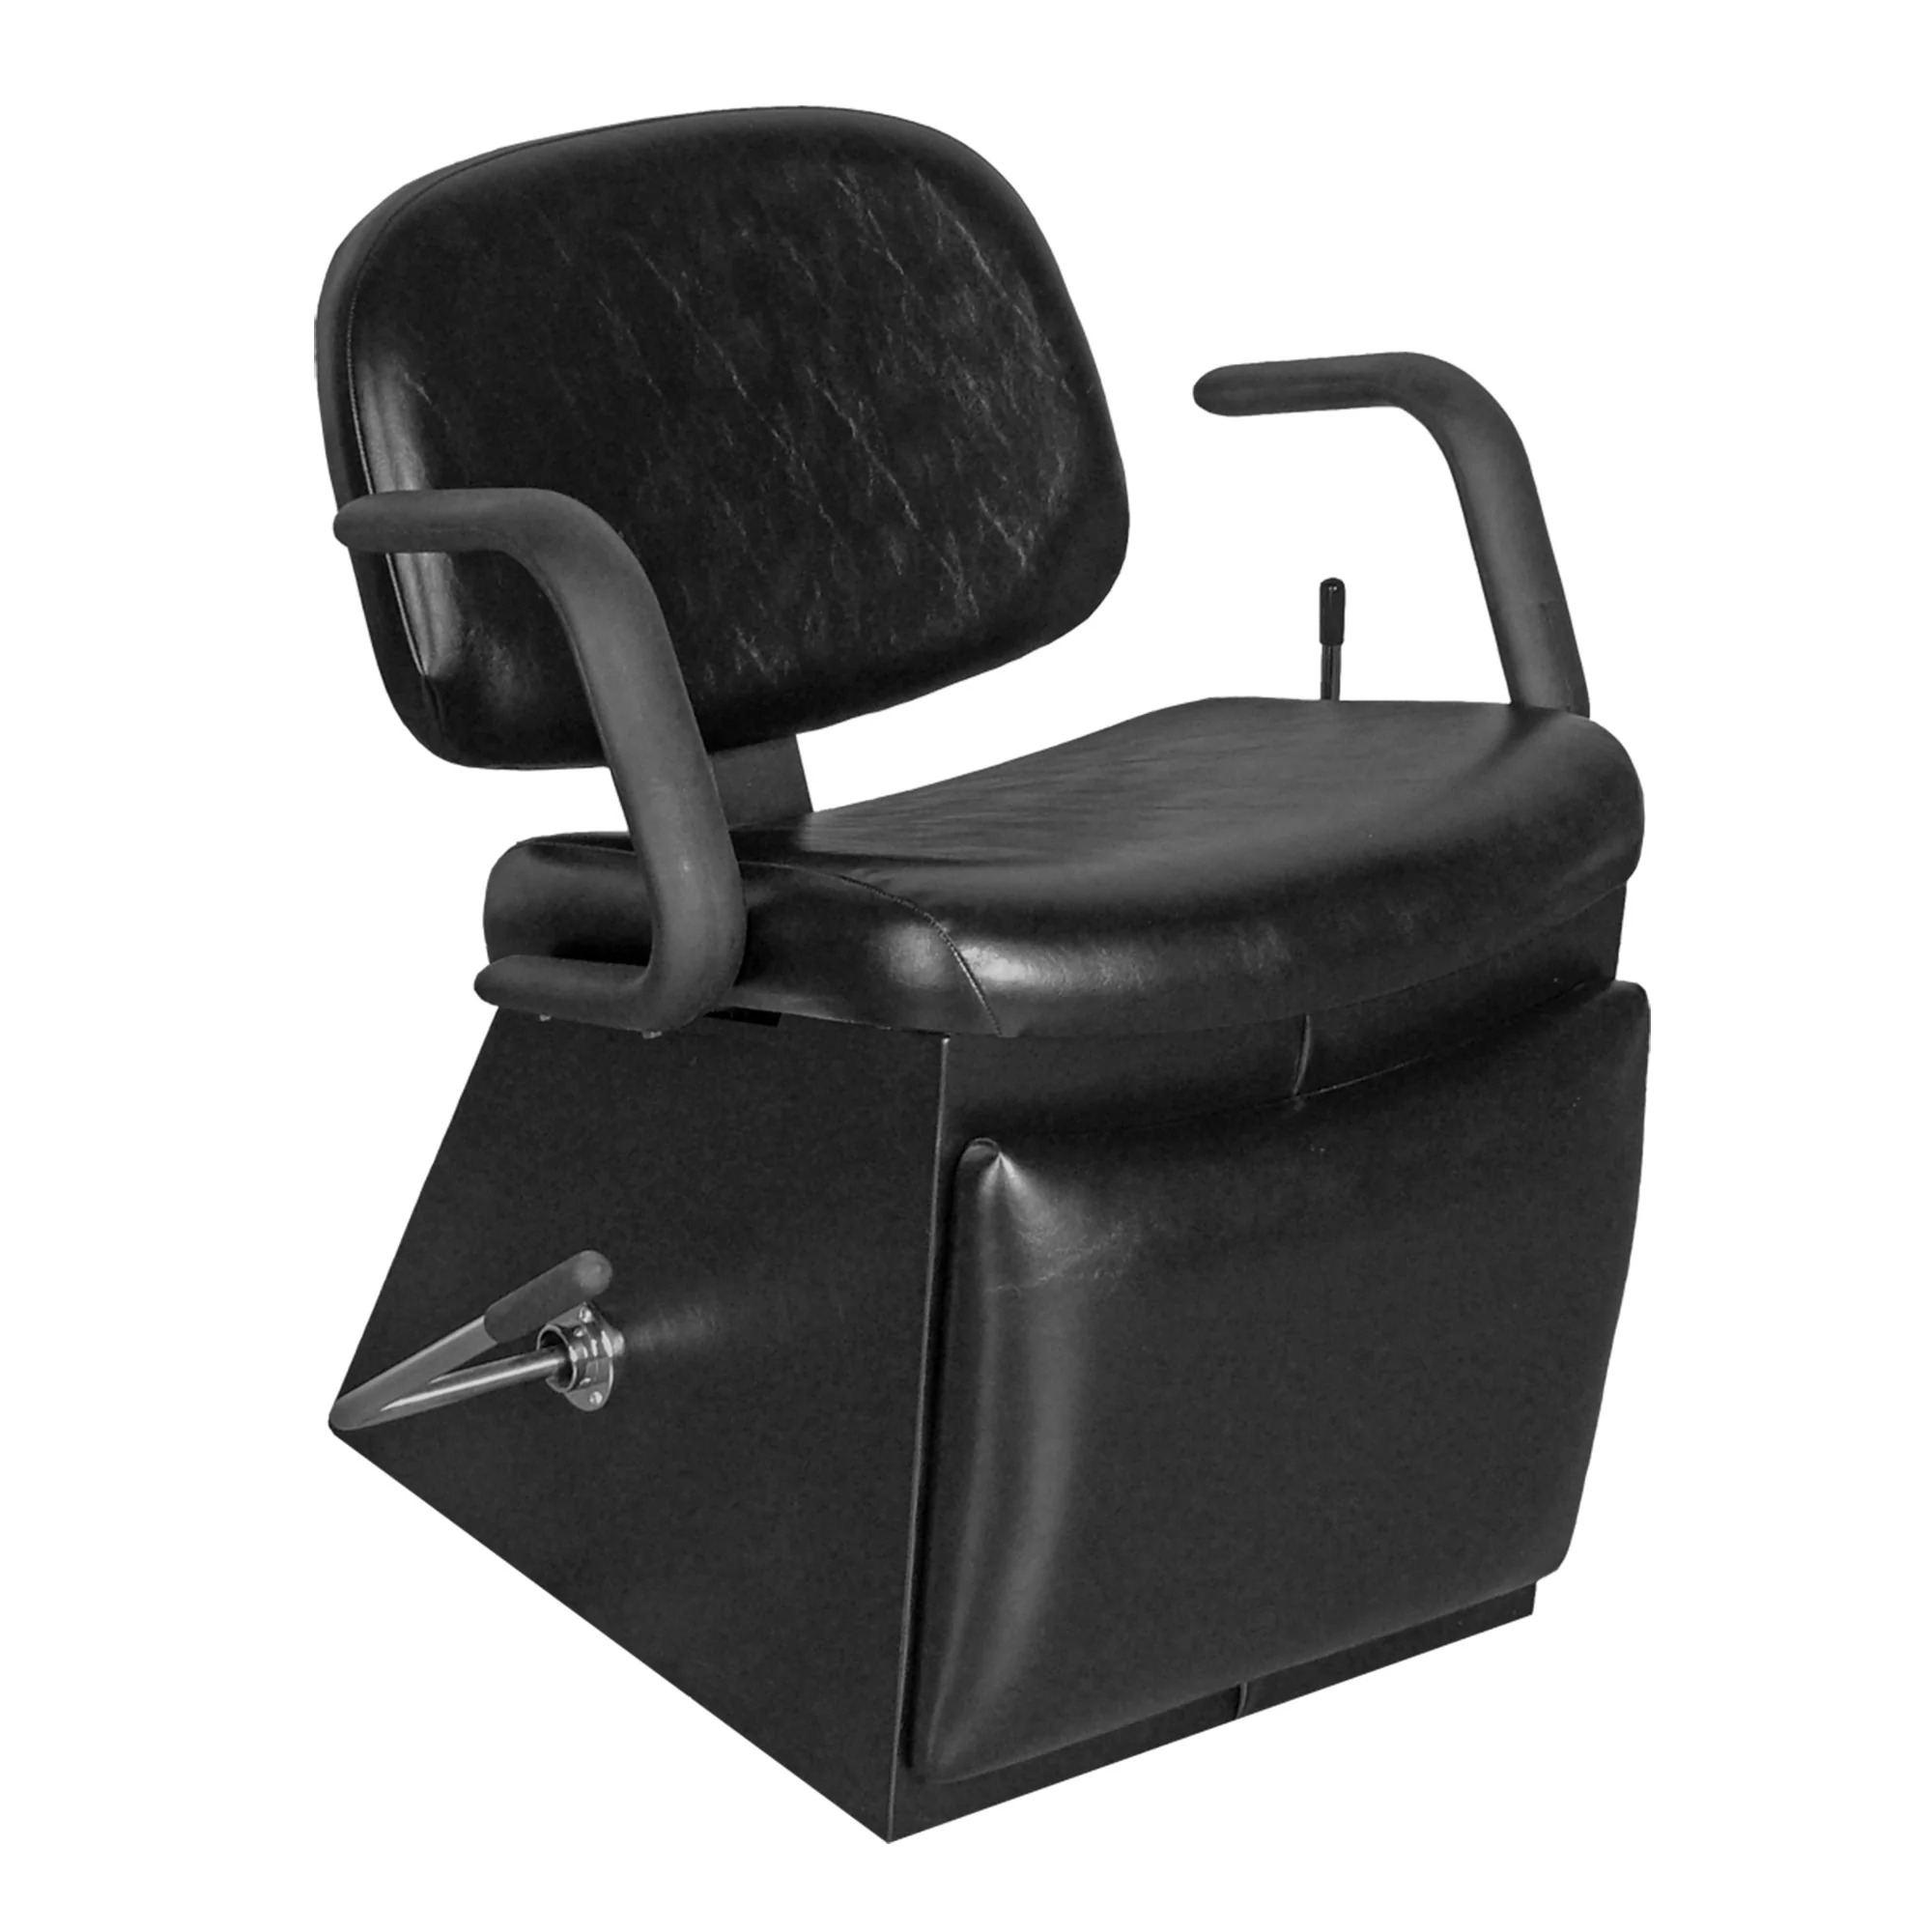 Collins JayLee Shampoo Chair with Leg Rest - COL-1950L